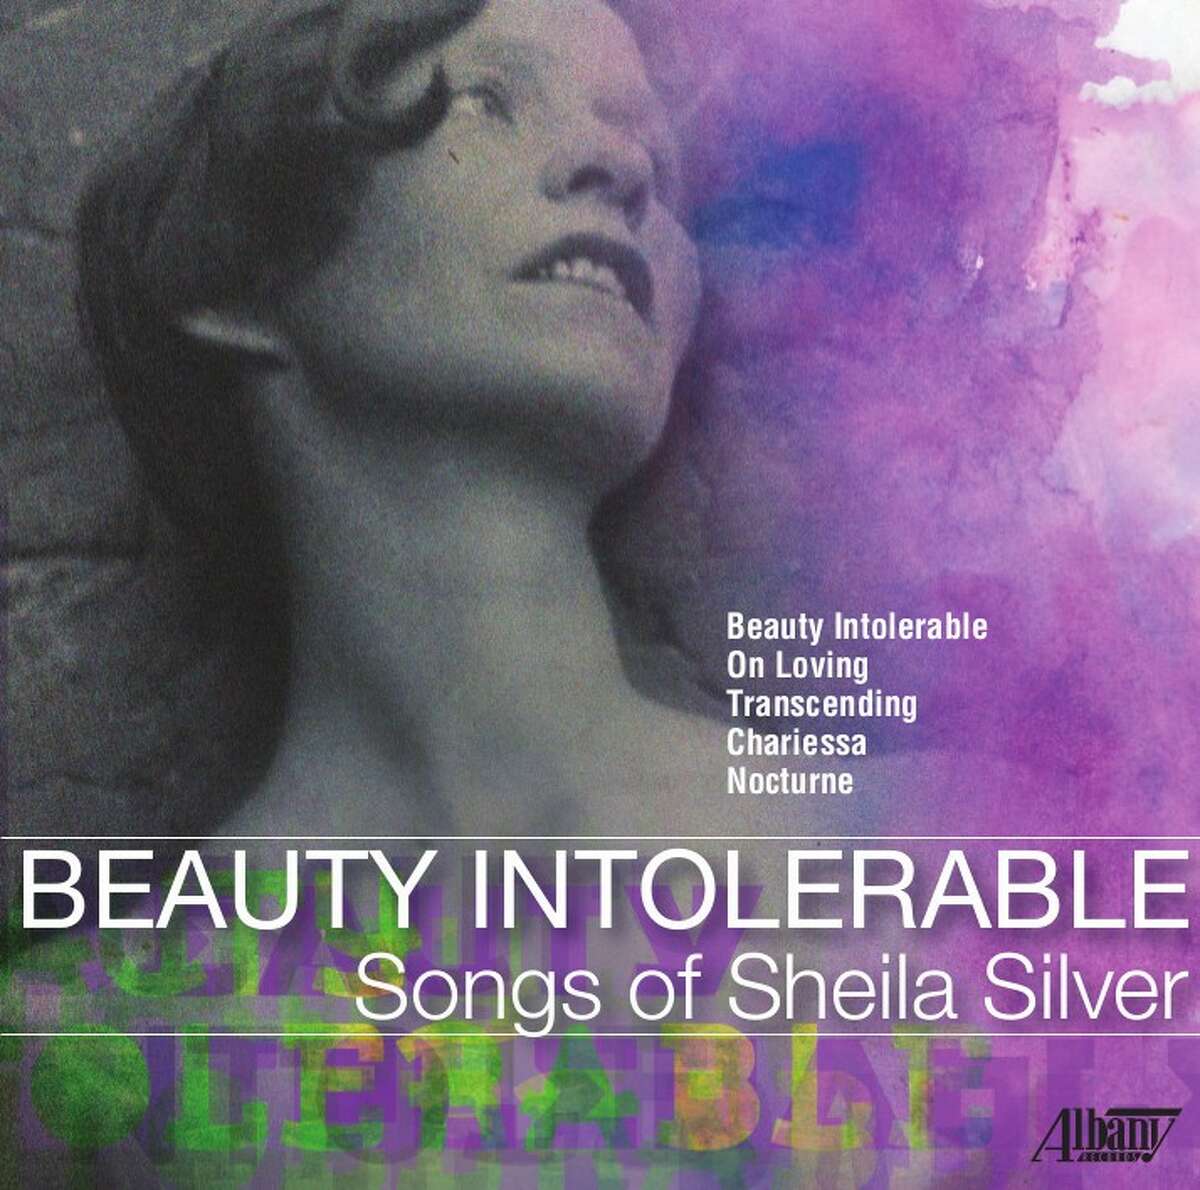 “Beauty Intolerable, A Songbook on the poetry of Edna St. Vincent Millay”